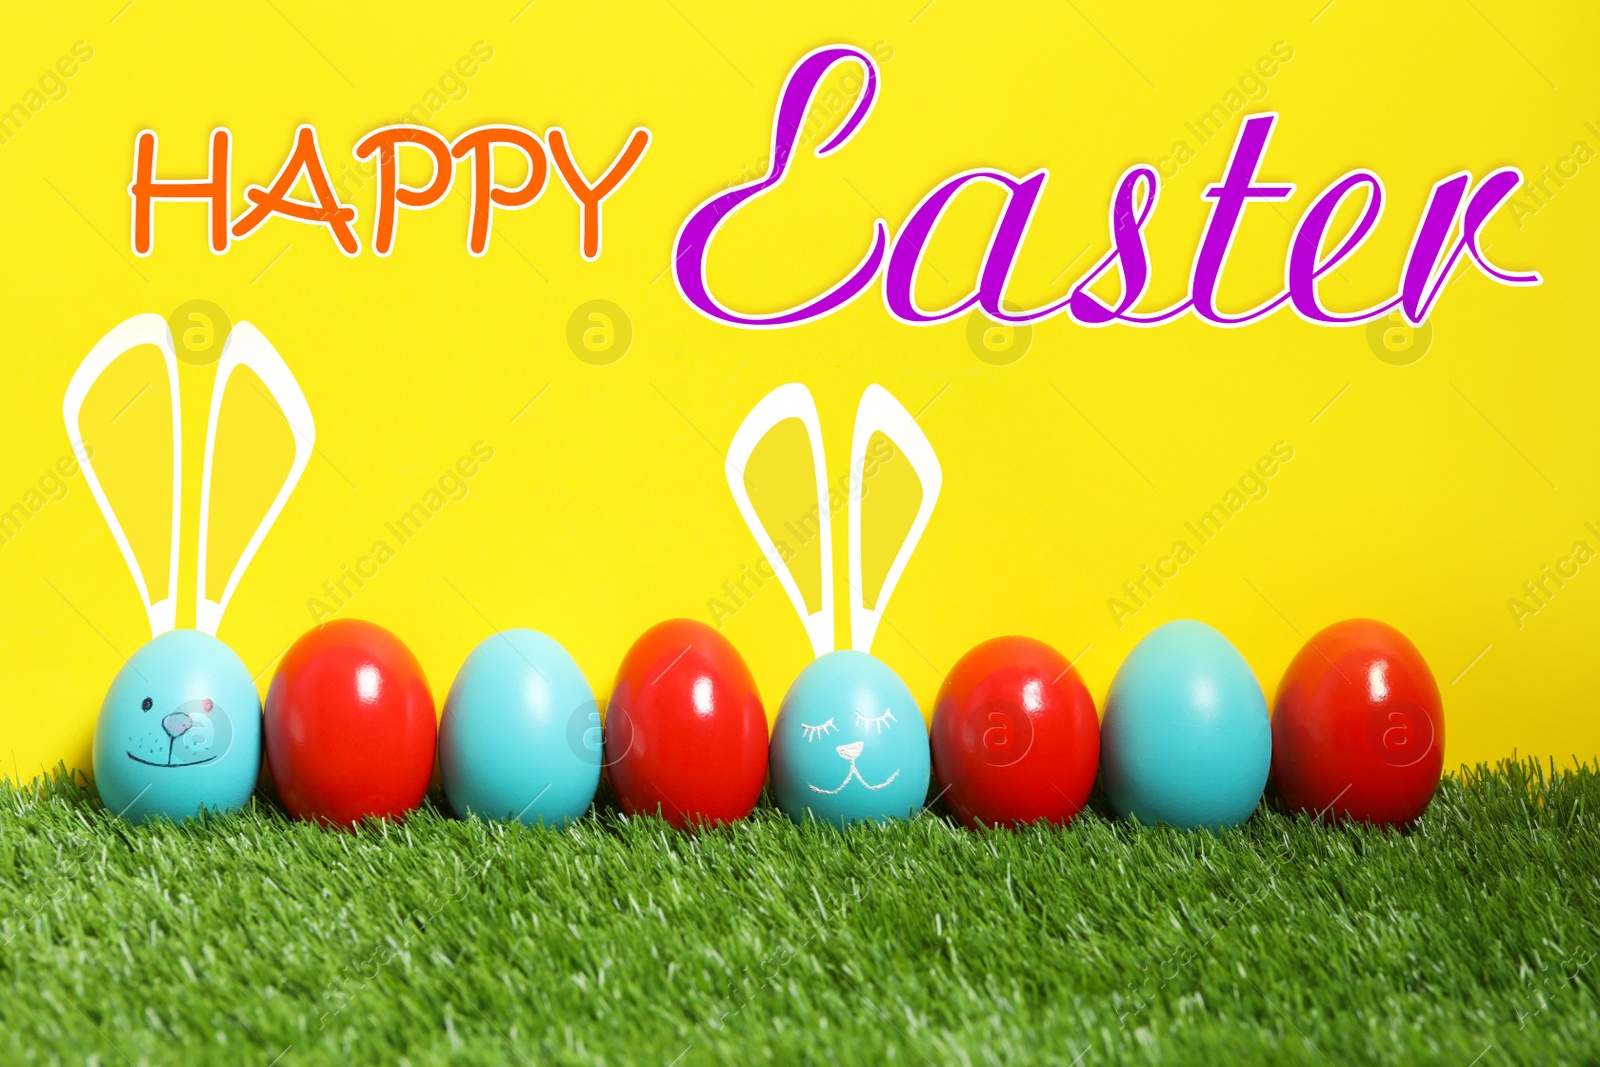 Image of Happy Easter. Two eggs with drawn faces and ears as bunnies among others on green grass against yellow background